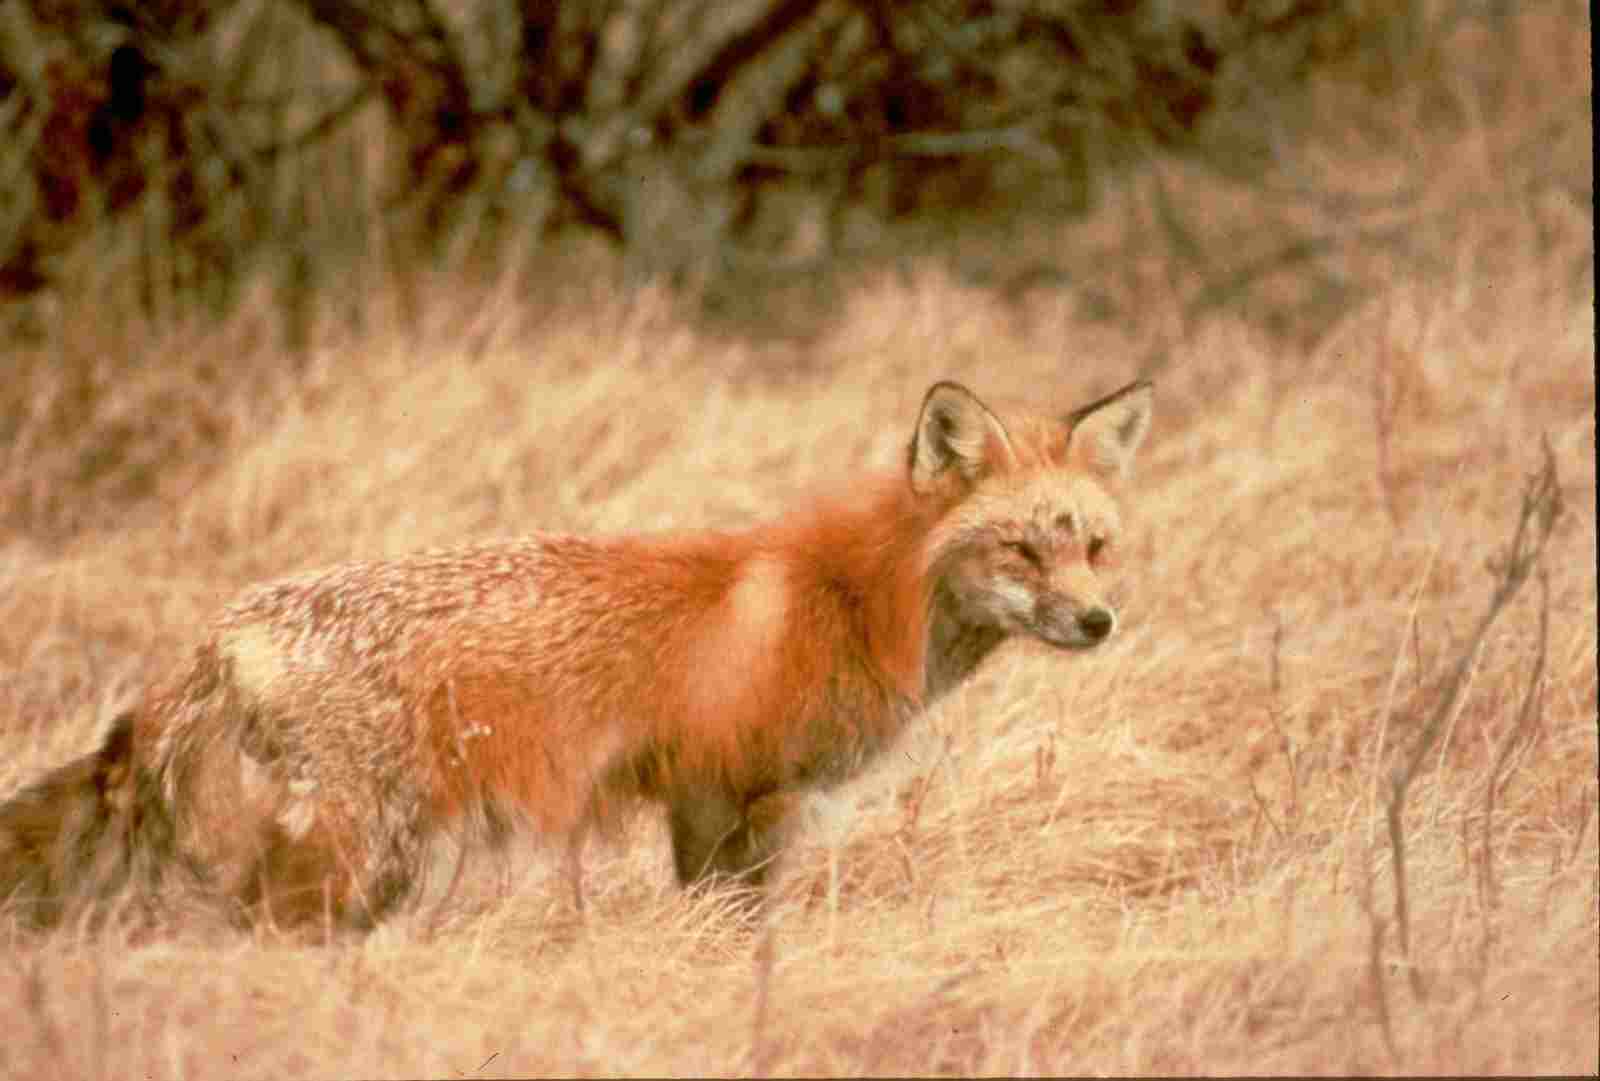 Fox Vs Dog: Wild Fox Populations are Threatened by Various Man-made Influences (Credit: USFWS Pacific Southwest Region 2011 .CC BY 2.0.)